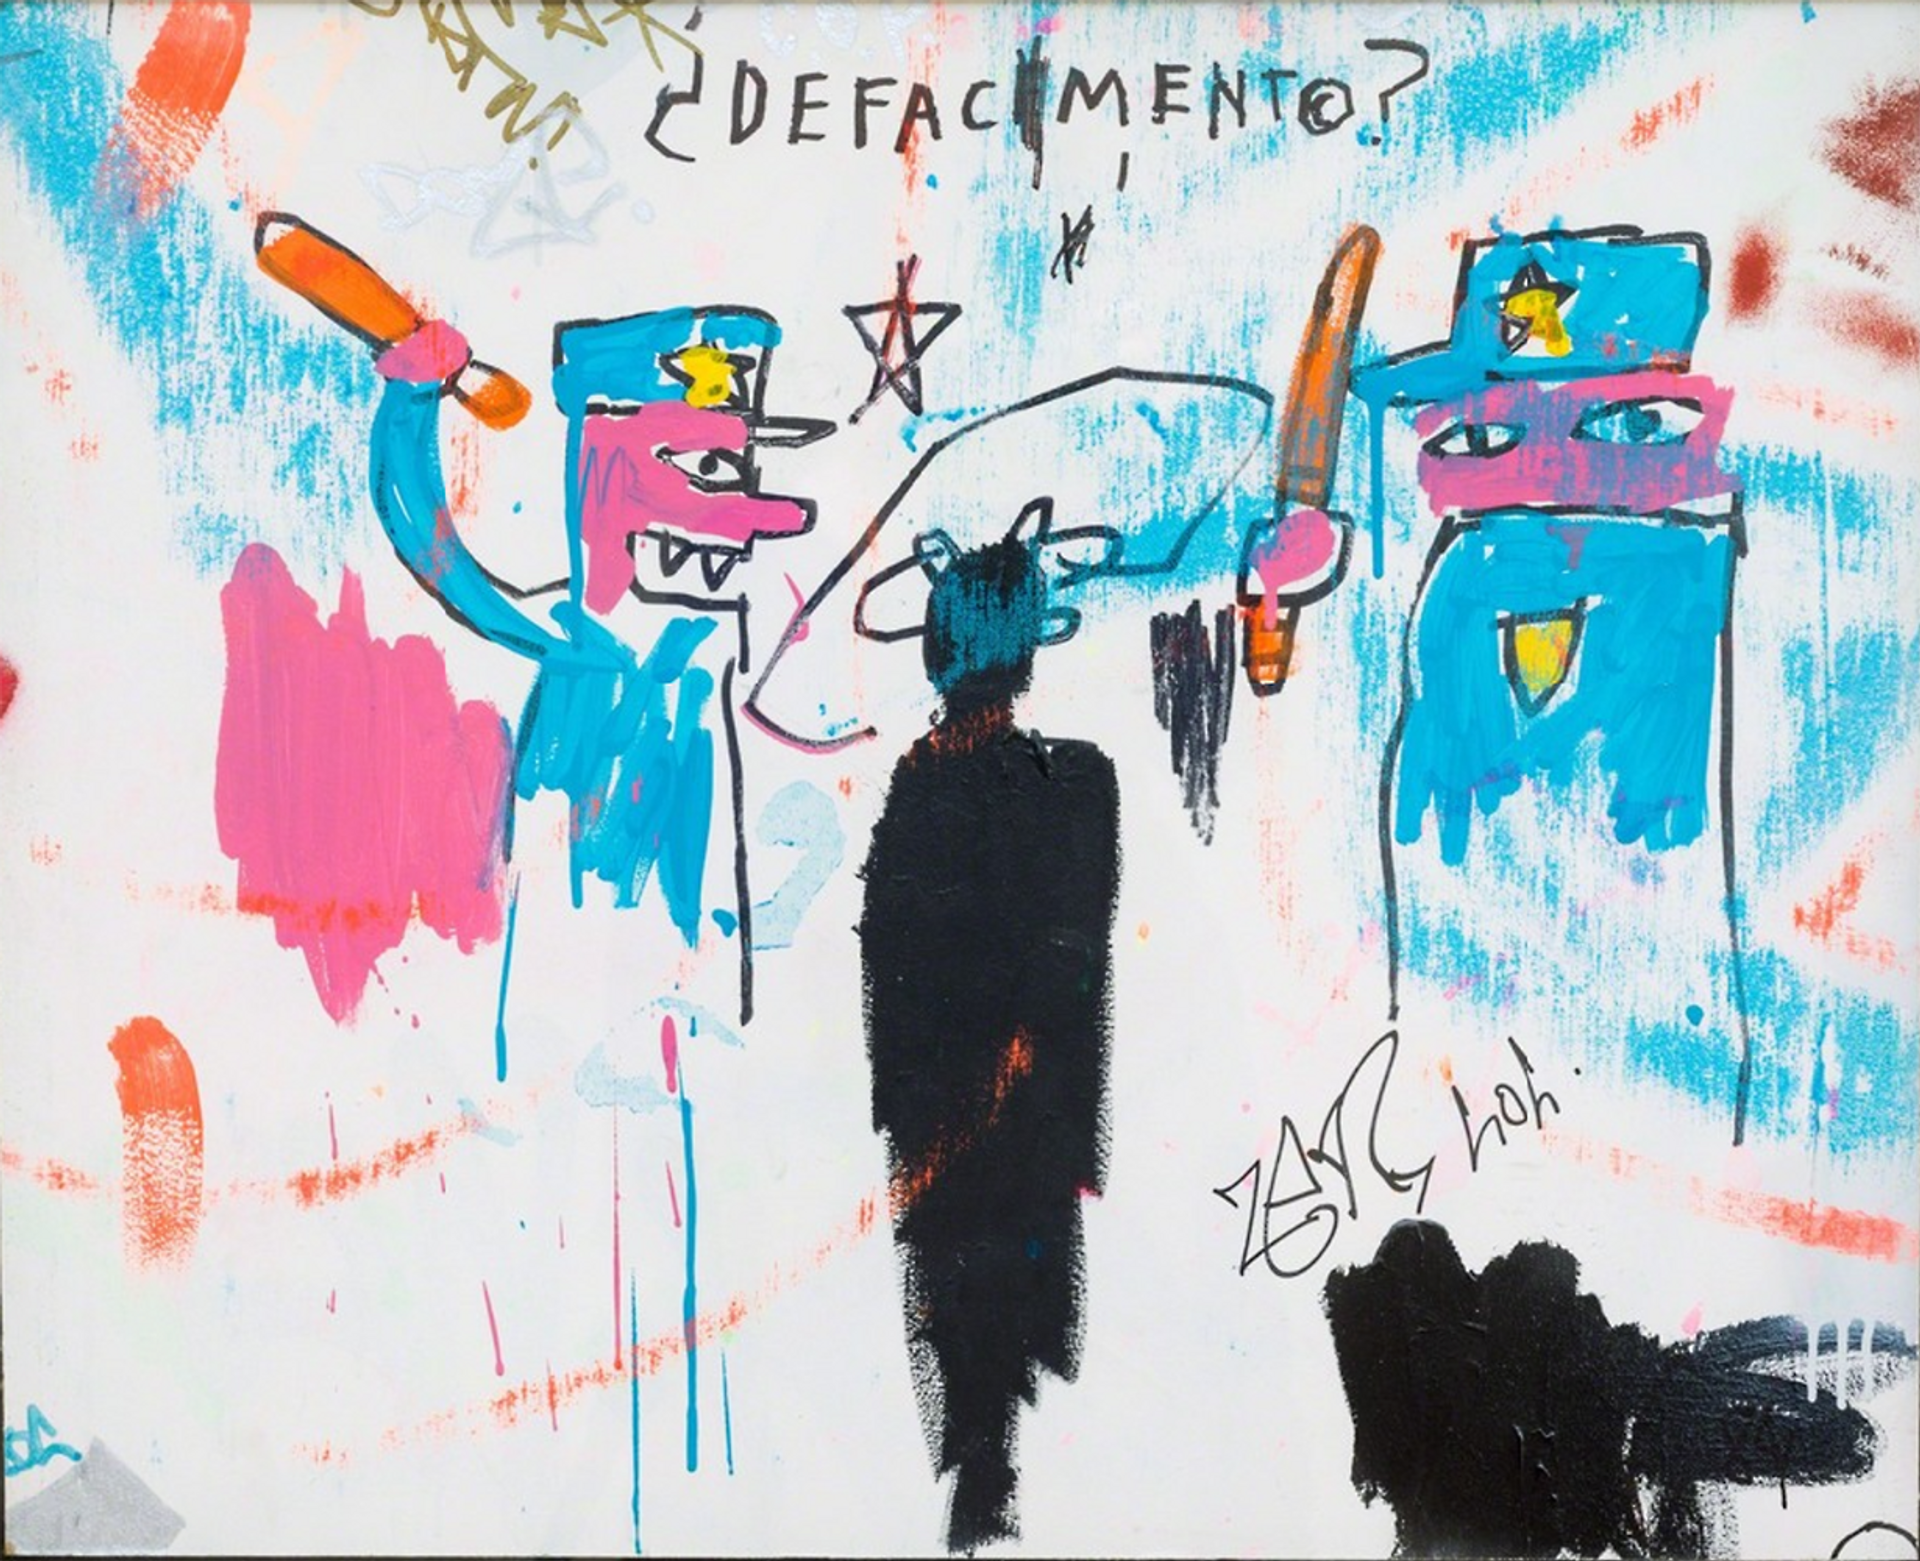 Jean-Michel Basquiat’s Defacement (The Death of Michael Stewart). A Neo-Expressionist depiction of two policemen assaulting a black figure in the centre of the painting.